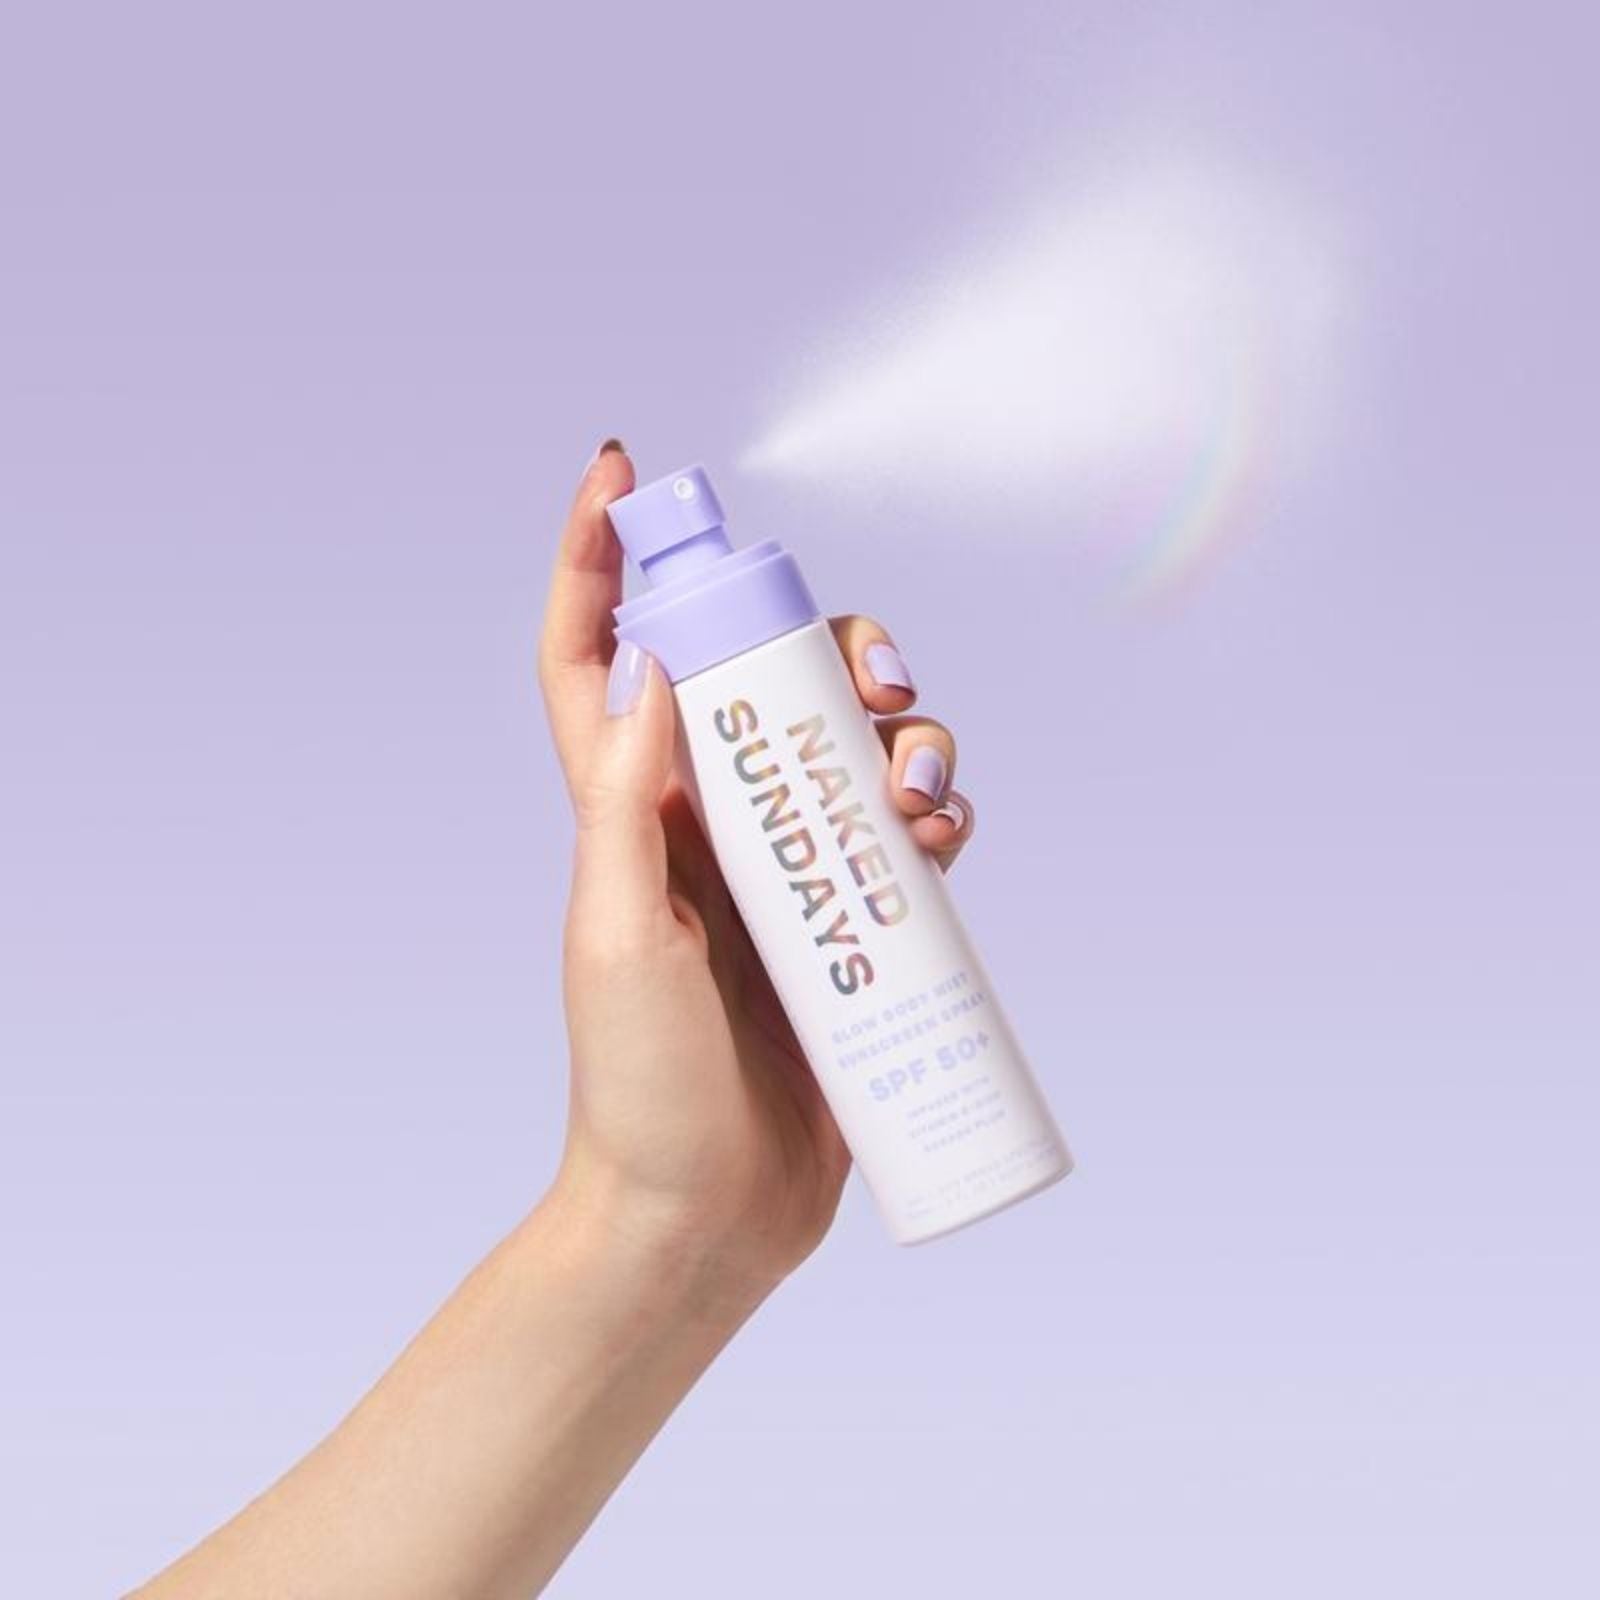 Glow Body Mist Sunscreen Spray held in hand and spraying